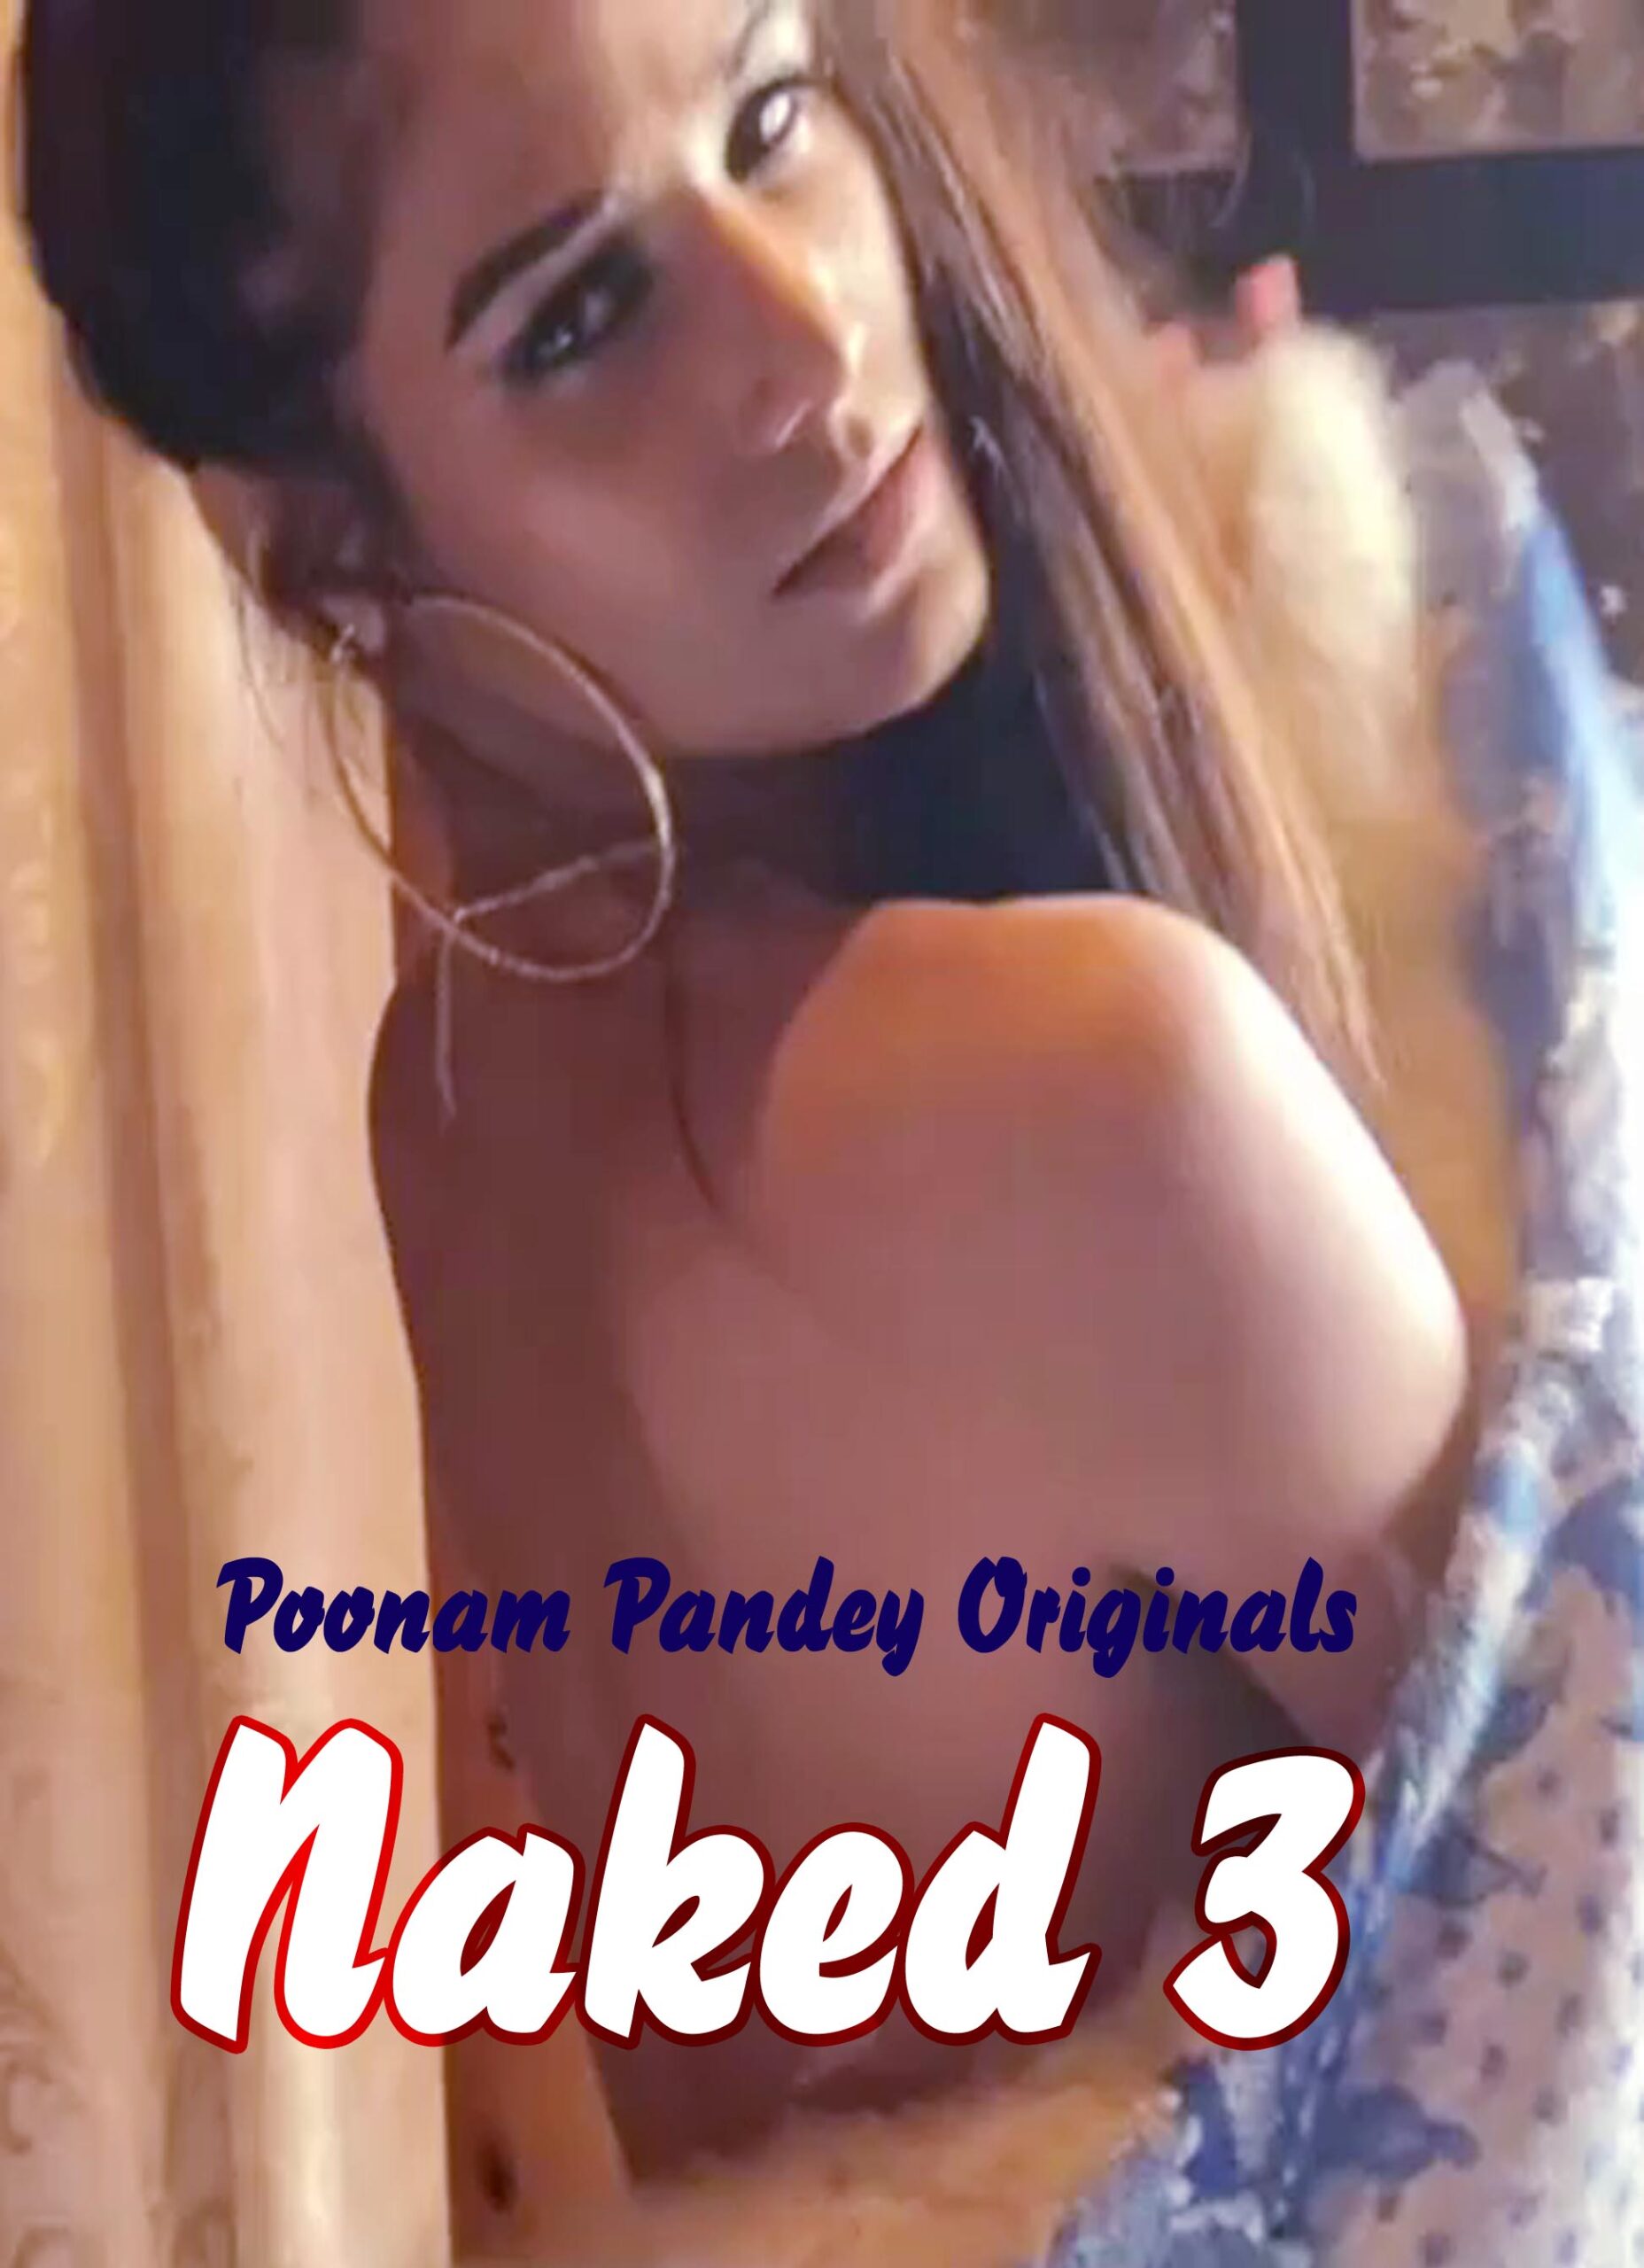 You are currently viewing Naked 3 2020 Hindi Poonam Pandey Hot Video 720p HDRip 150MB Download & Watch Online